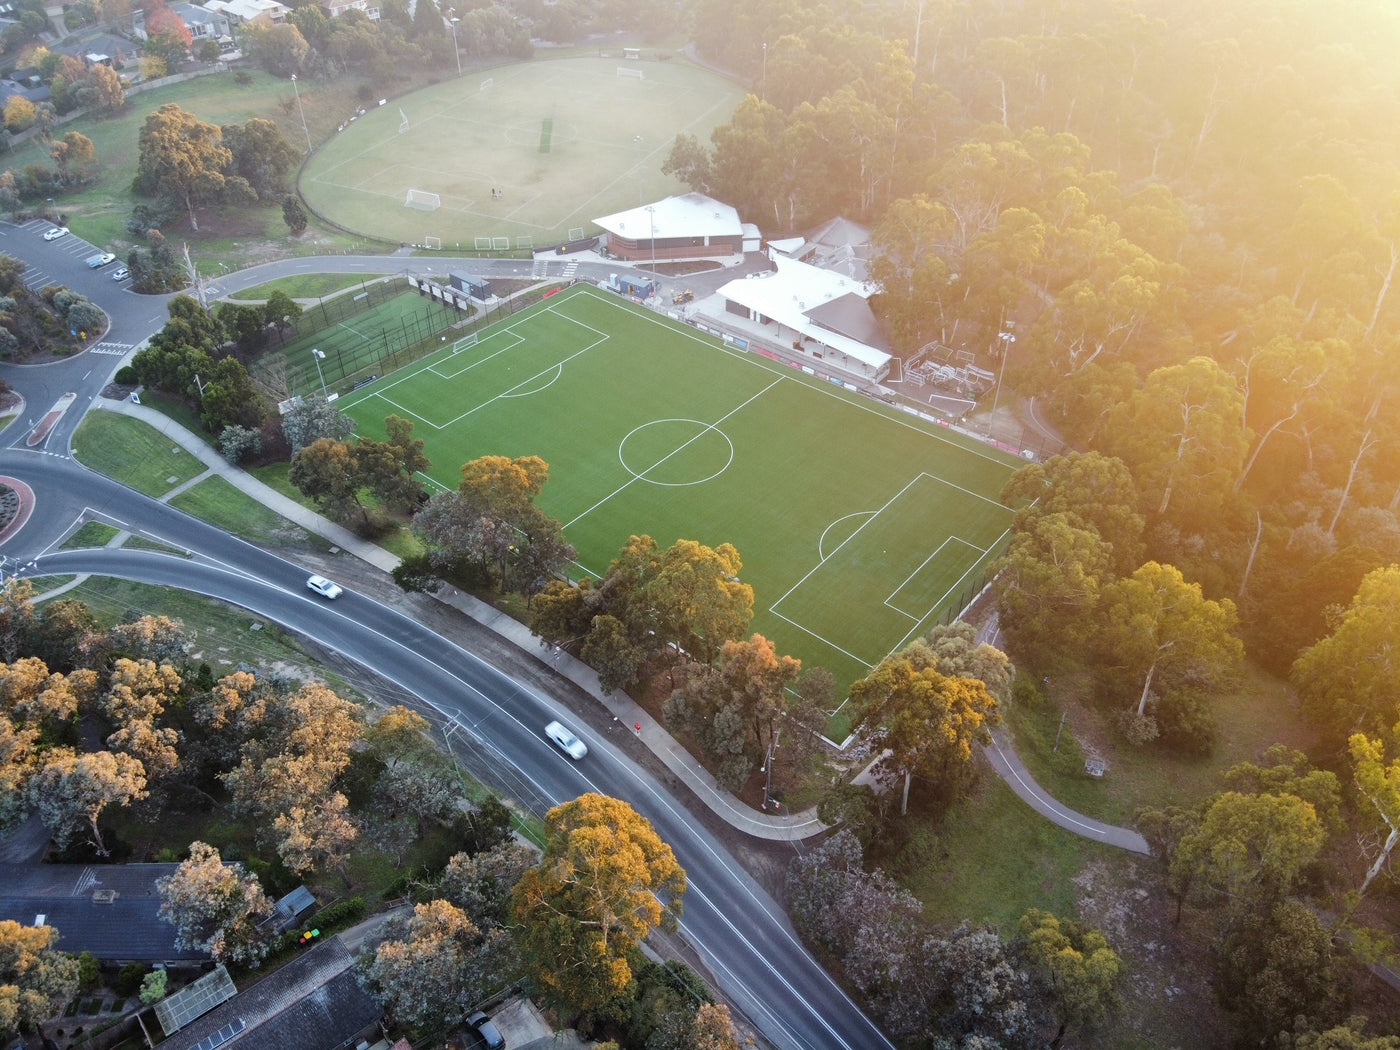 Eltham North FIFA Pitch - Tuff Group, Australia’s leading FIFA Certified commercial sports turf & synthetic grass specialists. 